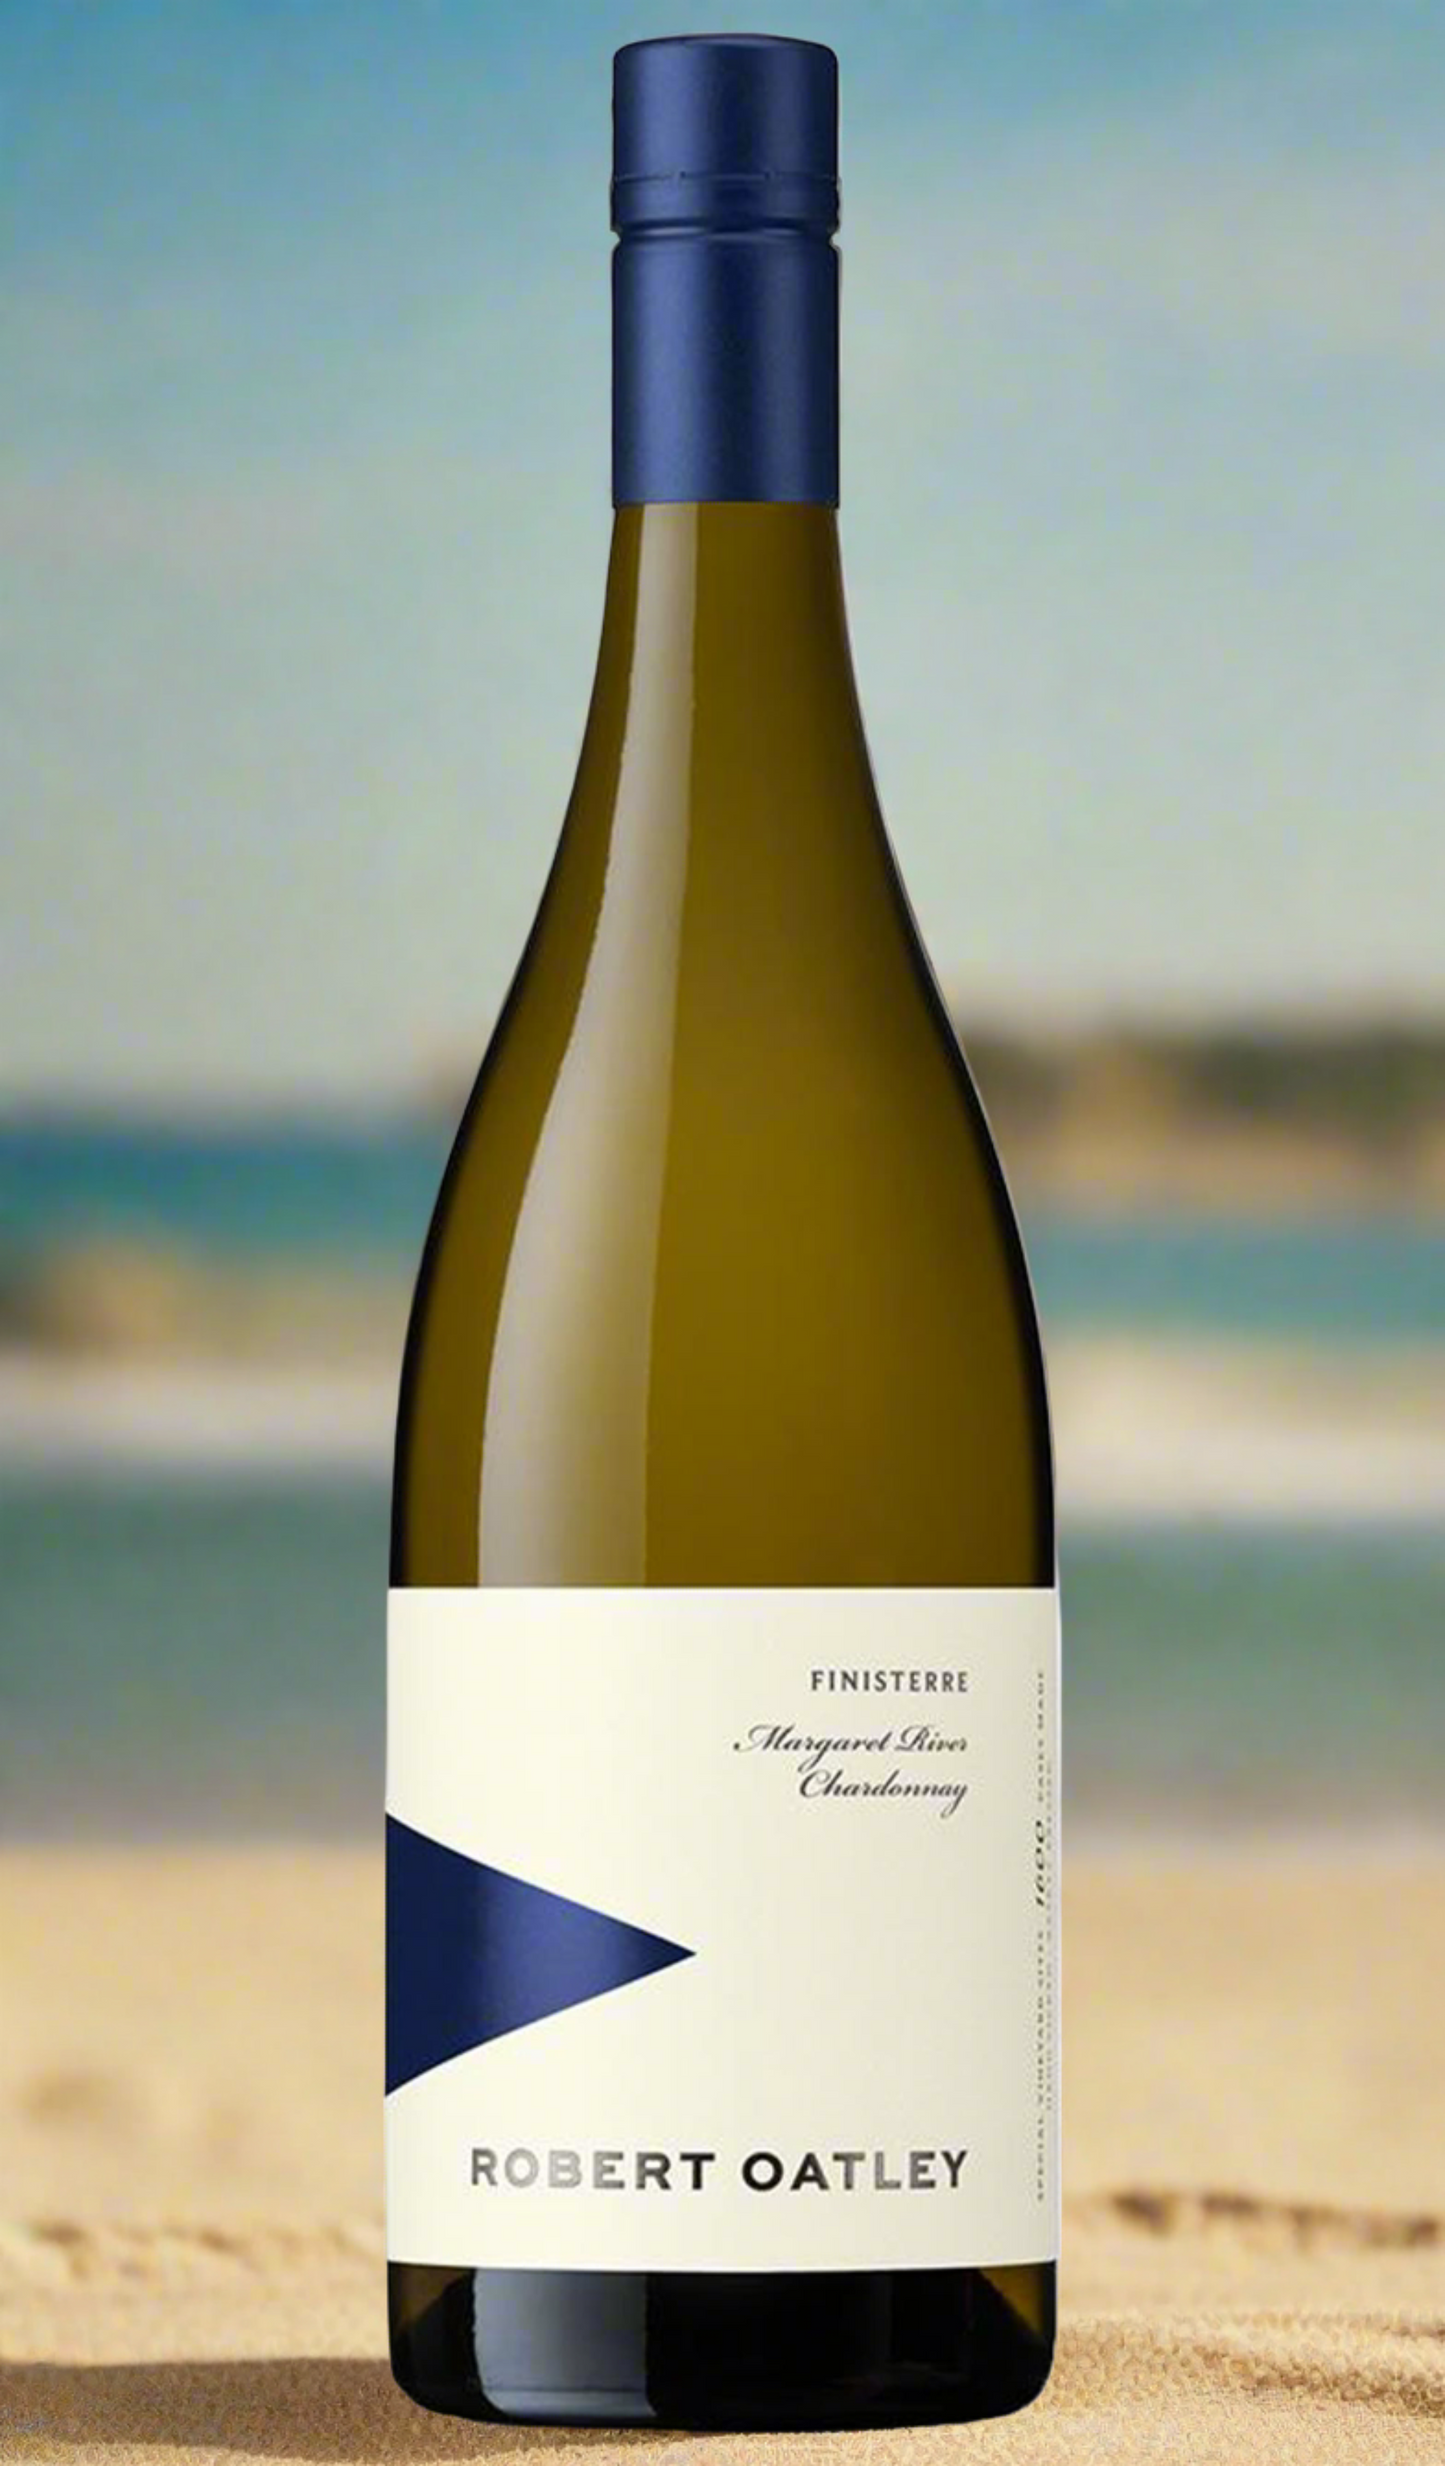 Find out more, explore the range and buy Robert Oatley Finisterre Chardonnay 2021 (Margaret River) available online at Wine Sellers Direct - Australia's independent liquor specialists.